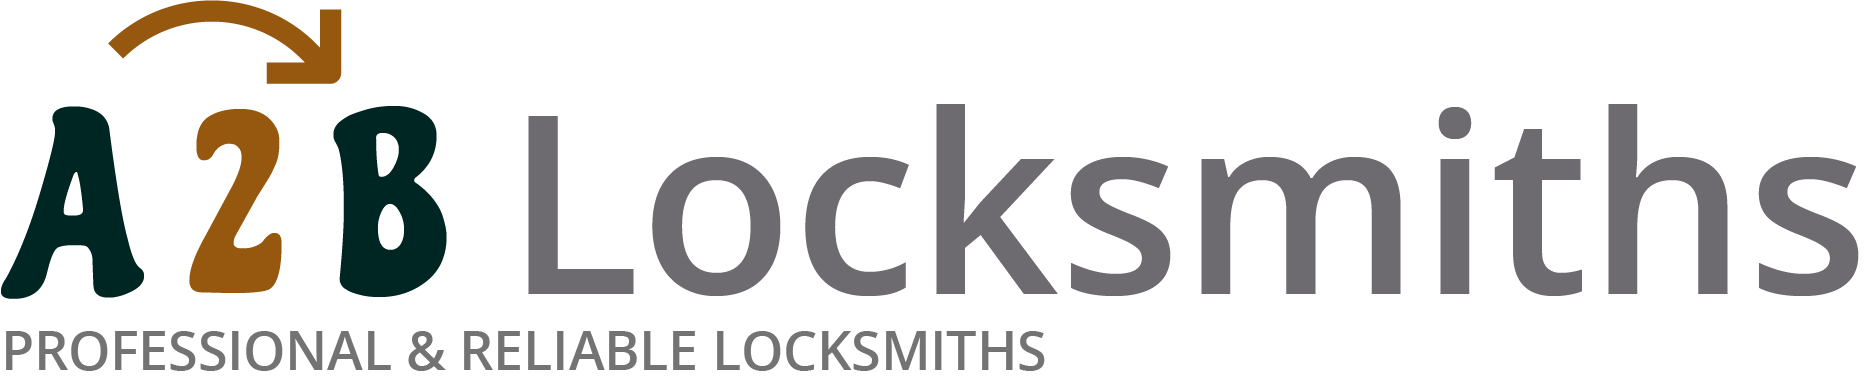 If you are locked out of house in Ipswich, our 24/7 local emergency locksmith services can help you.